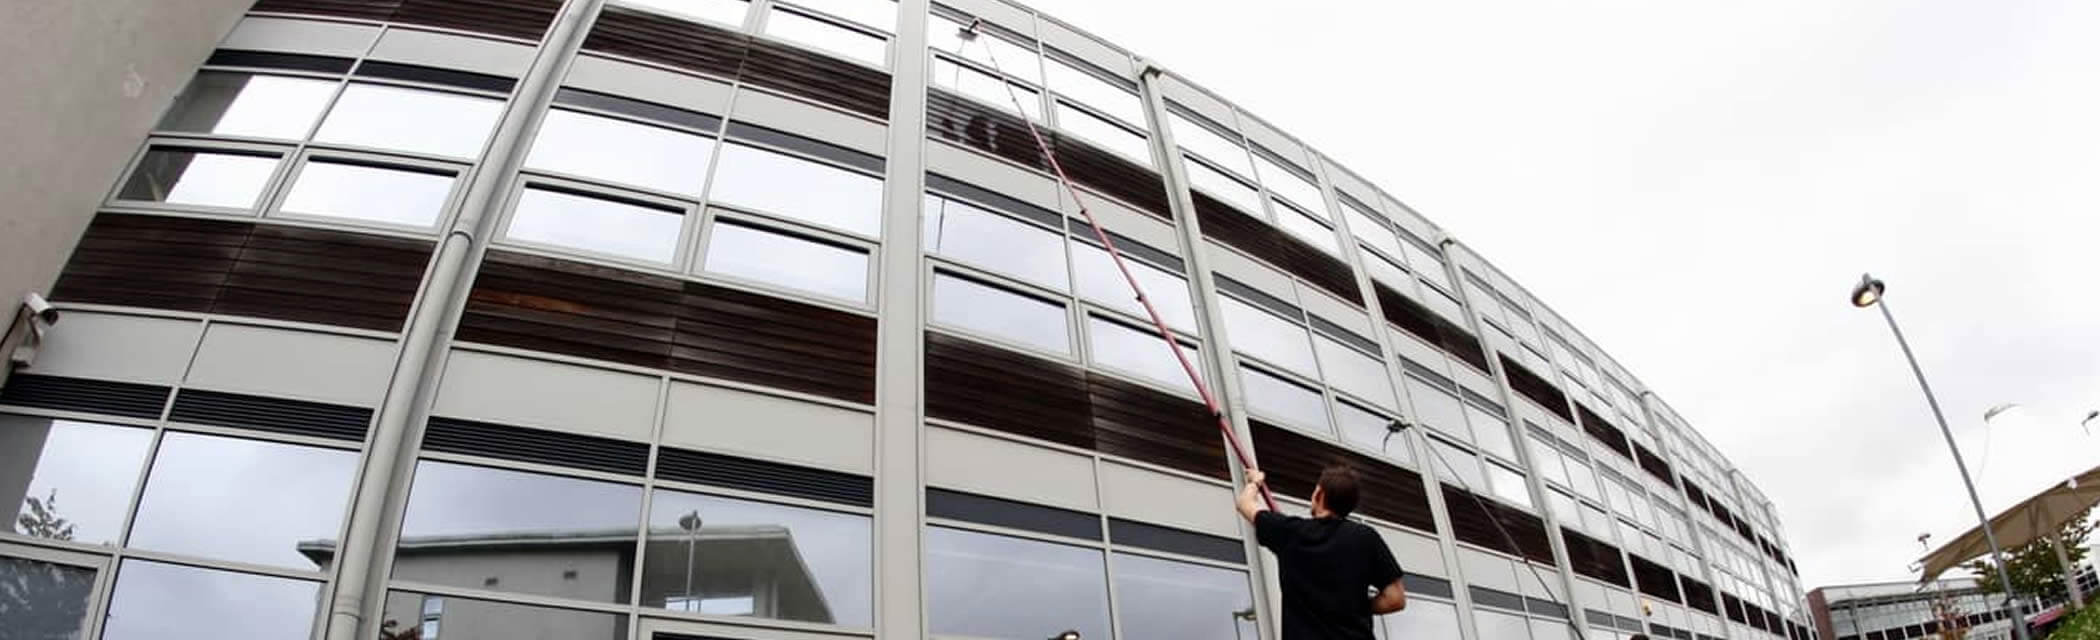 Commercial Window Cleaning Wake Forest & Raleigh NC